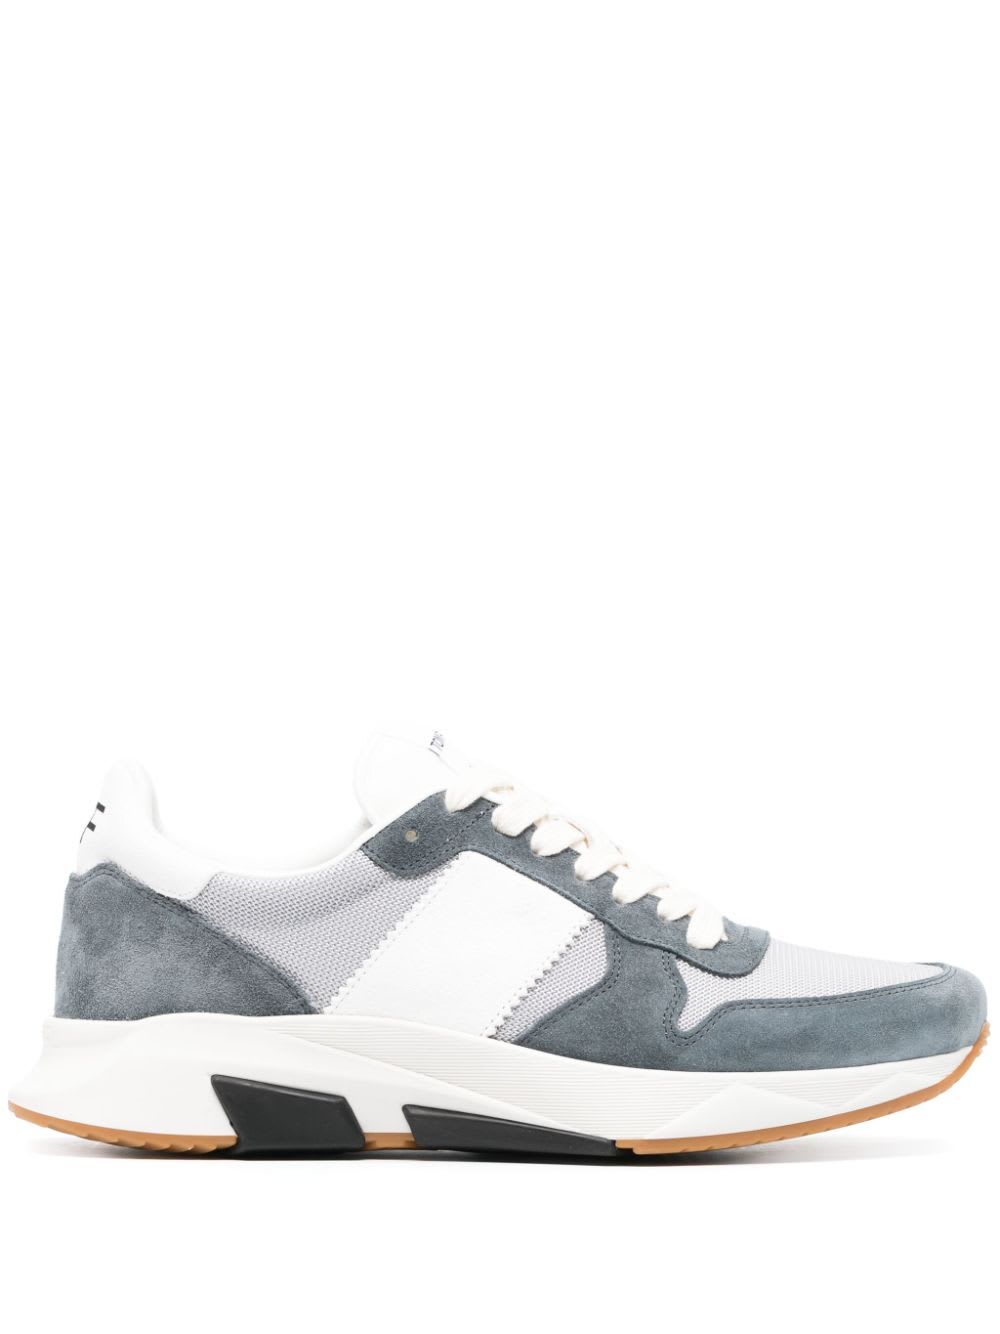 Tom Ford Low Top Sneakers In Silver Petrol Blue White